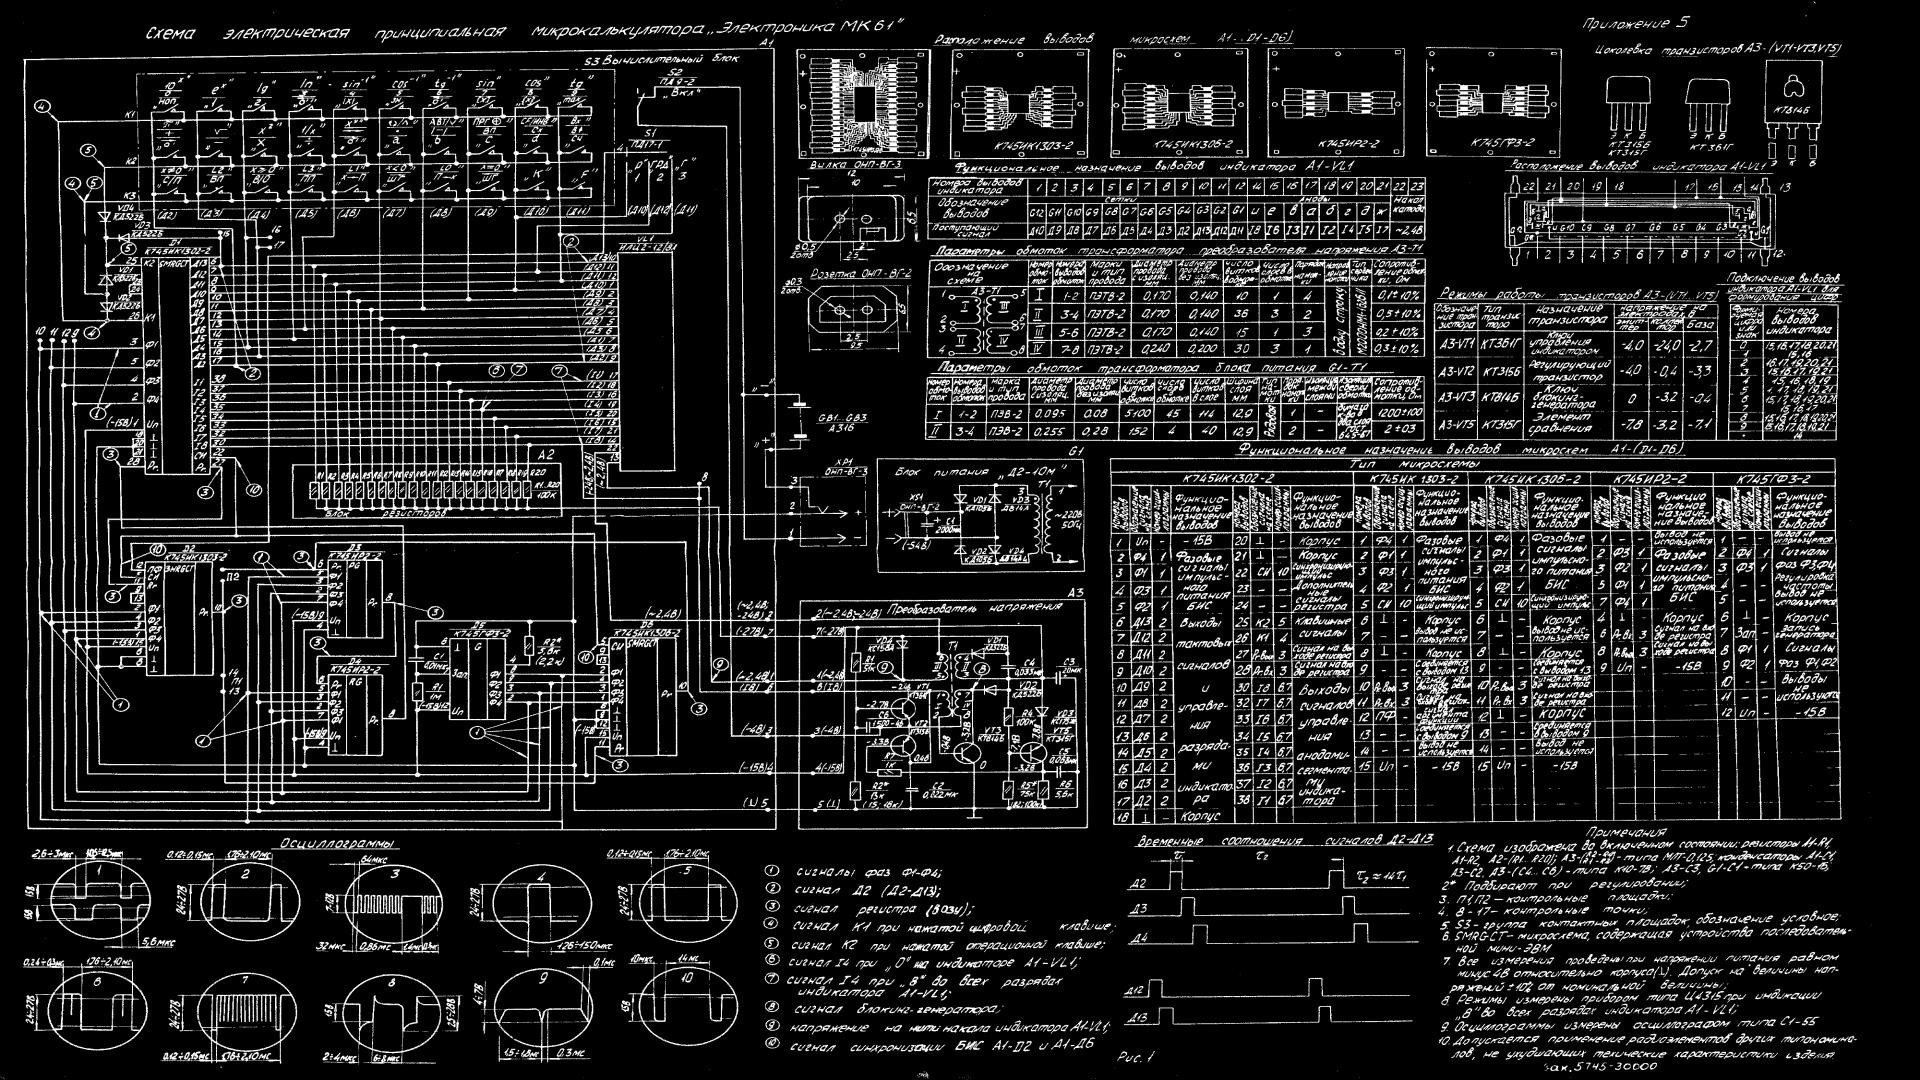 microchip, Integrated circuits, Waveforms, Schematic Wallpapers HD